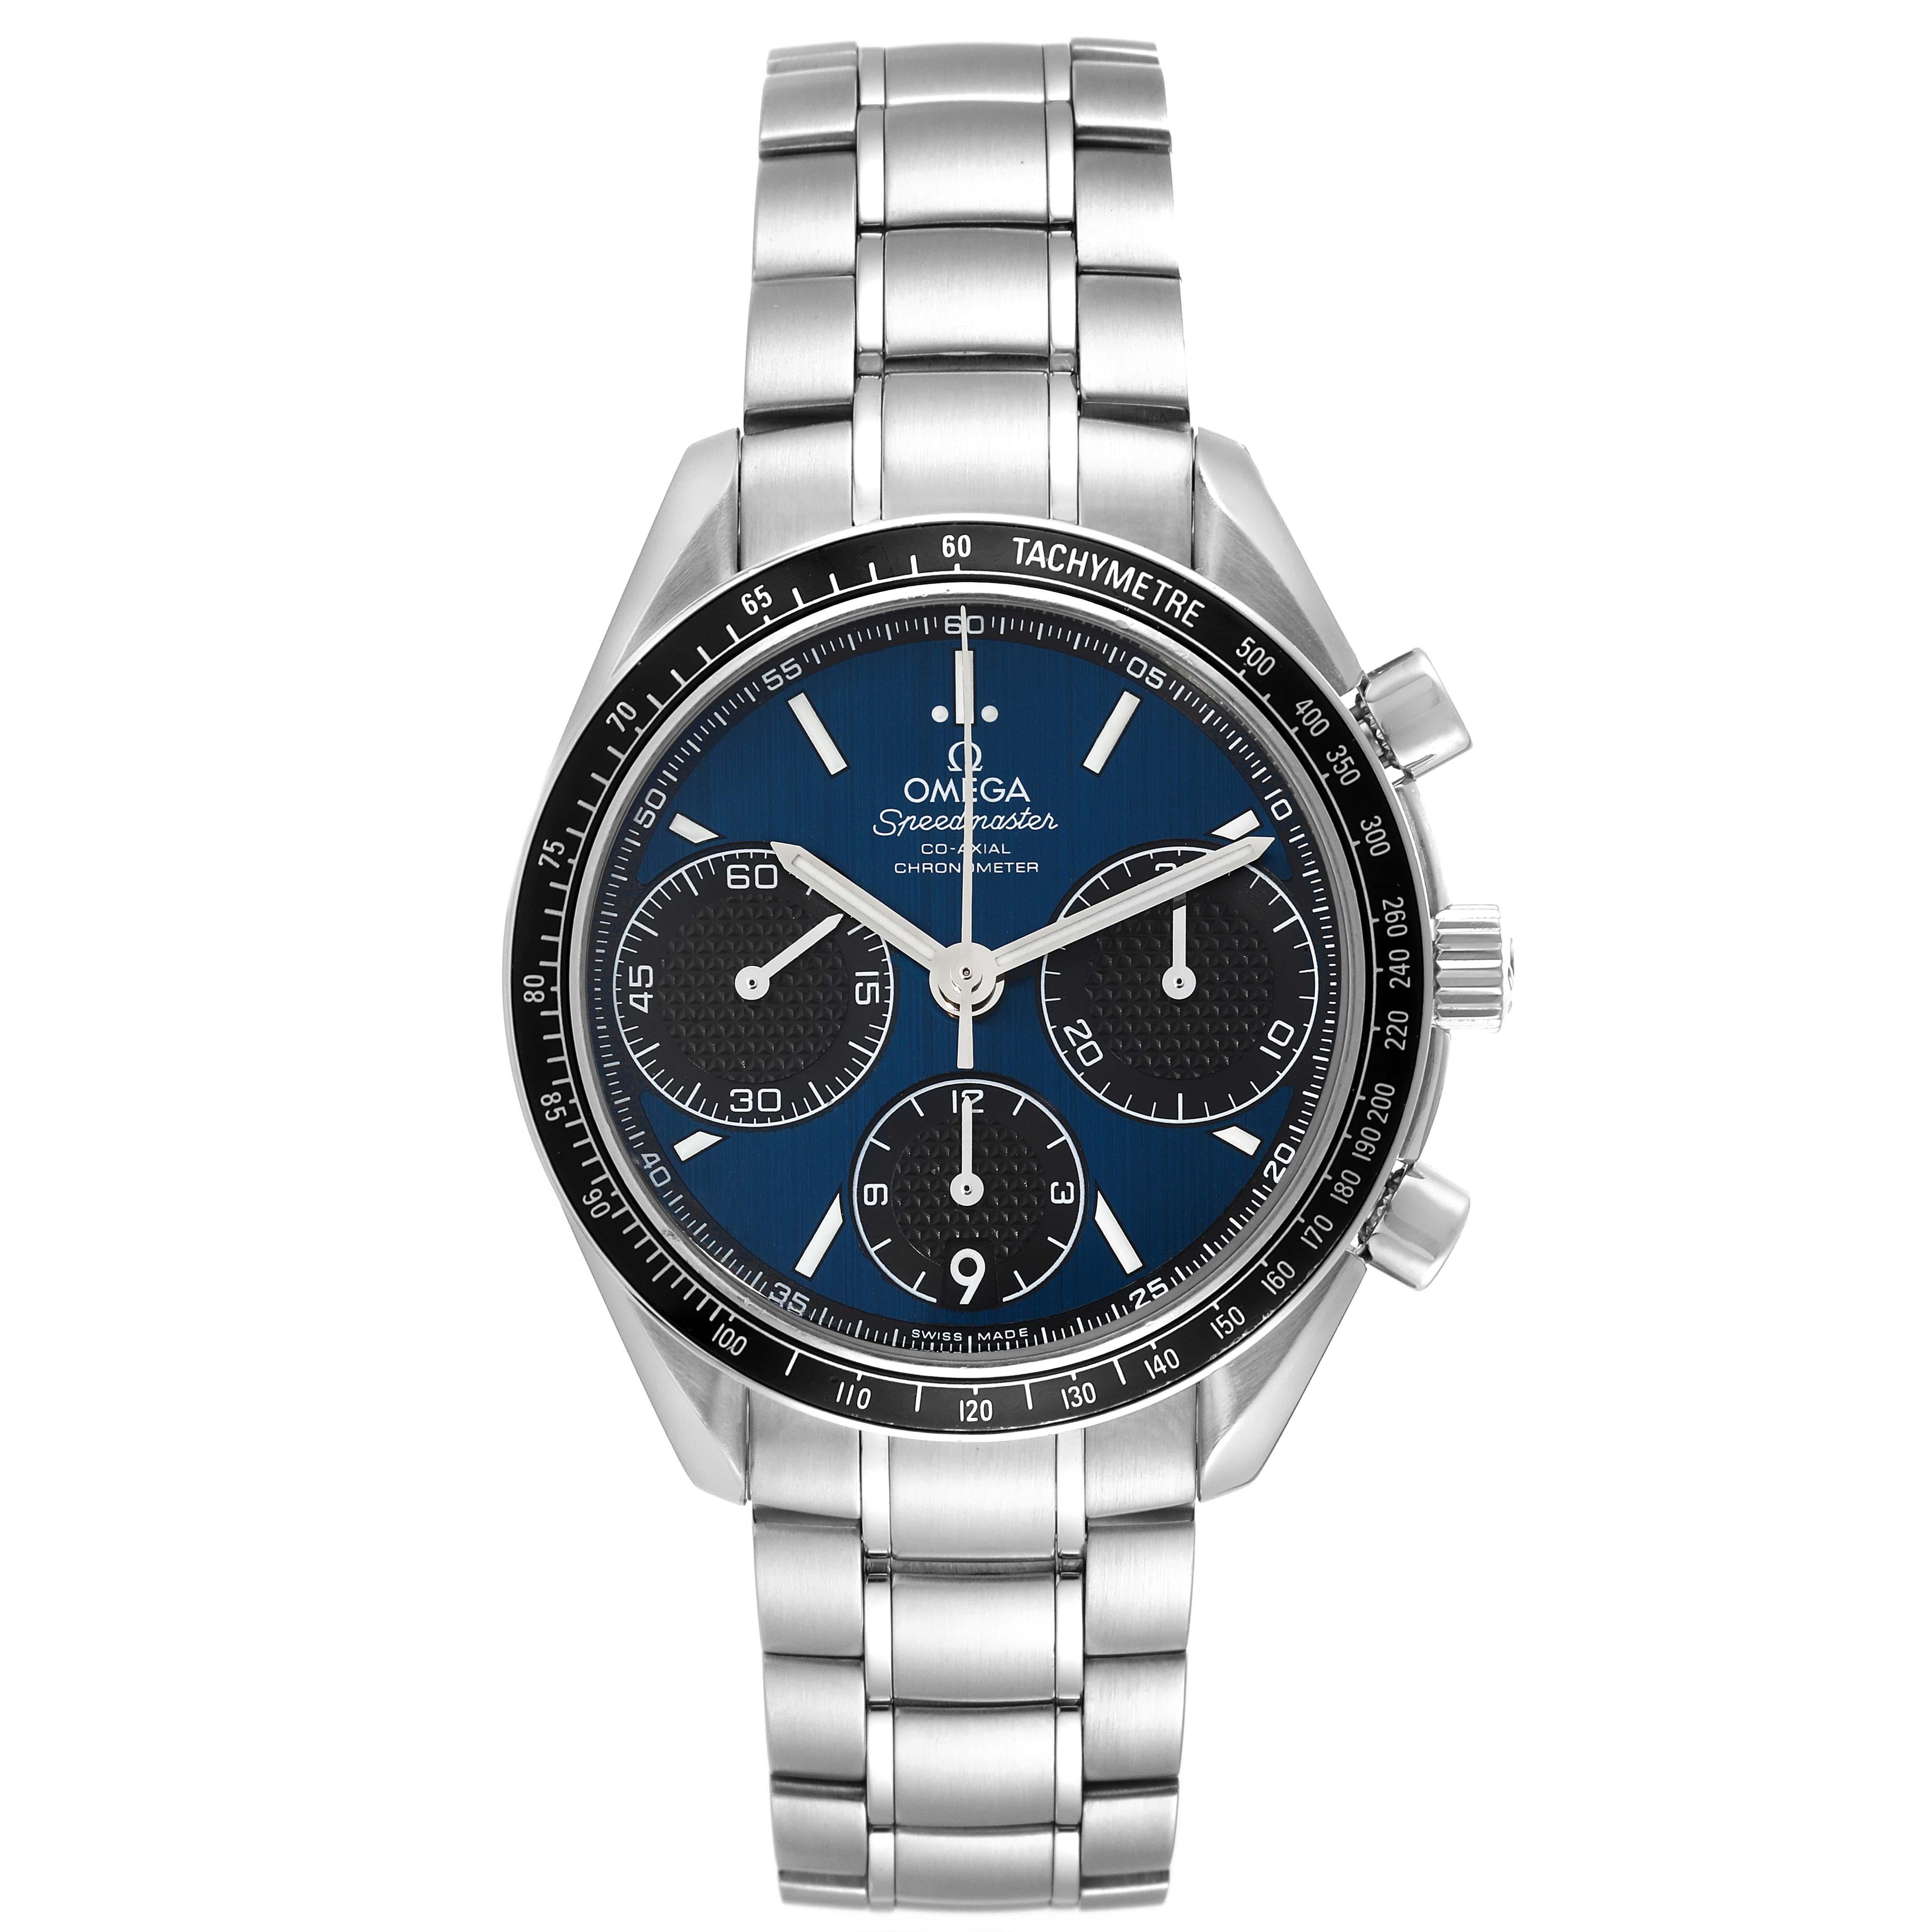 Omega Speedmaster Racing Blue Dial Steel Mens Watch 326.30.40.50.03.001 Box Card. Automatic Self-winding chronograph movement with column-wheel mechanism and Co-Axial escapement. Free sprung-balance equipped with Si14 silicon balance spring.